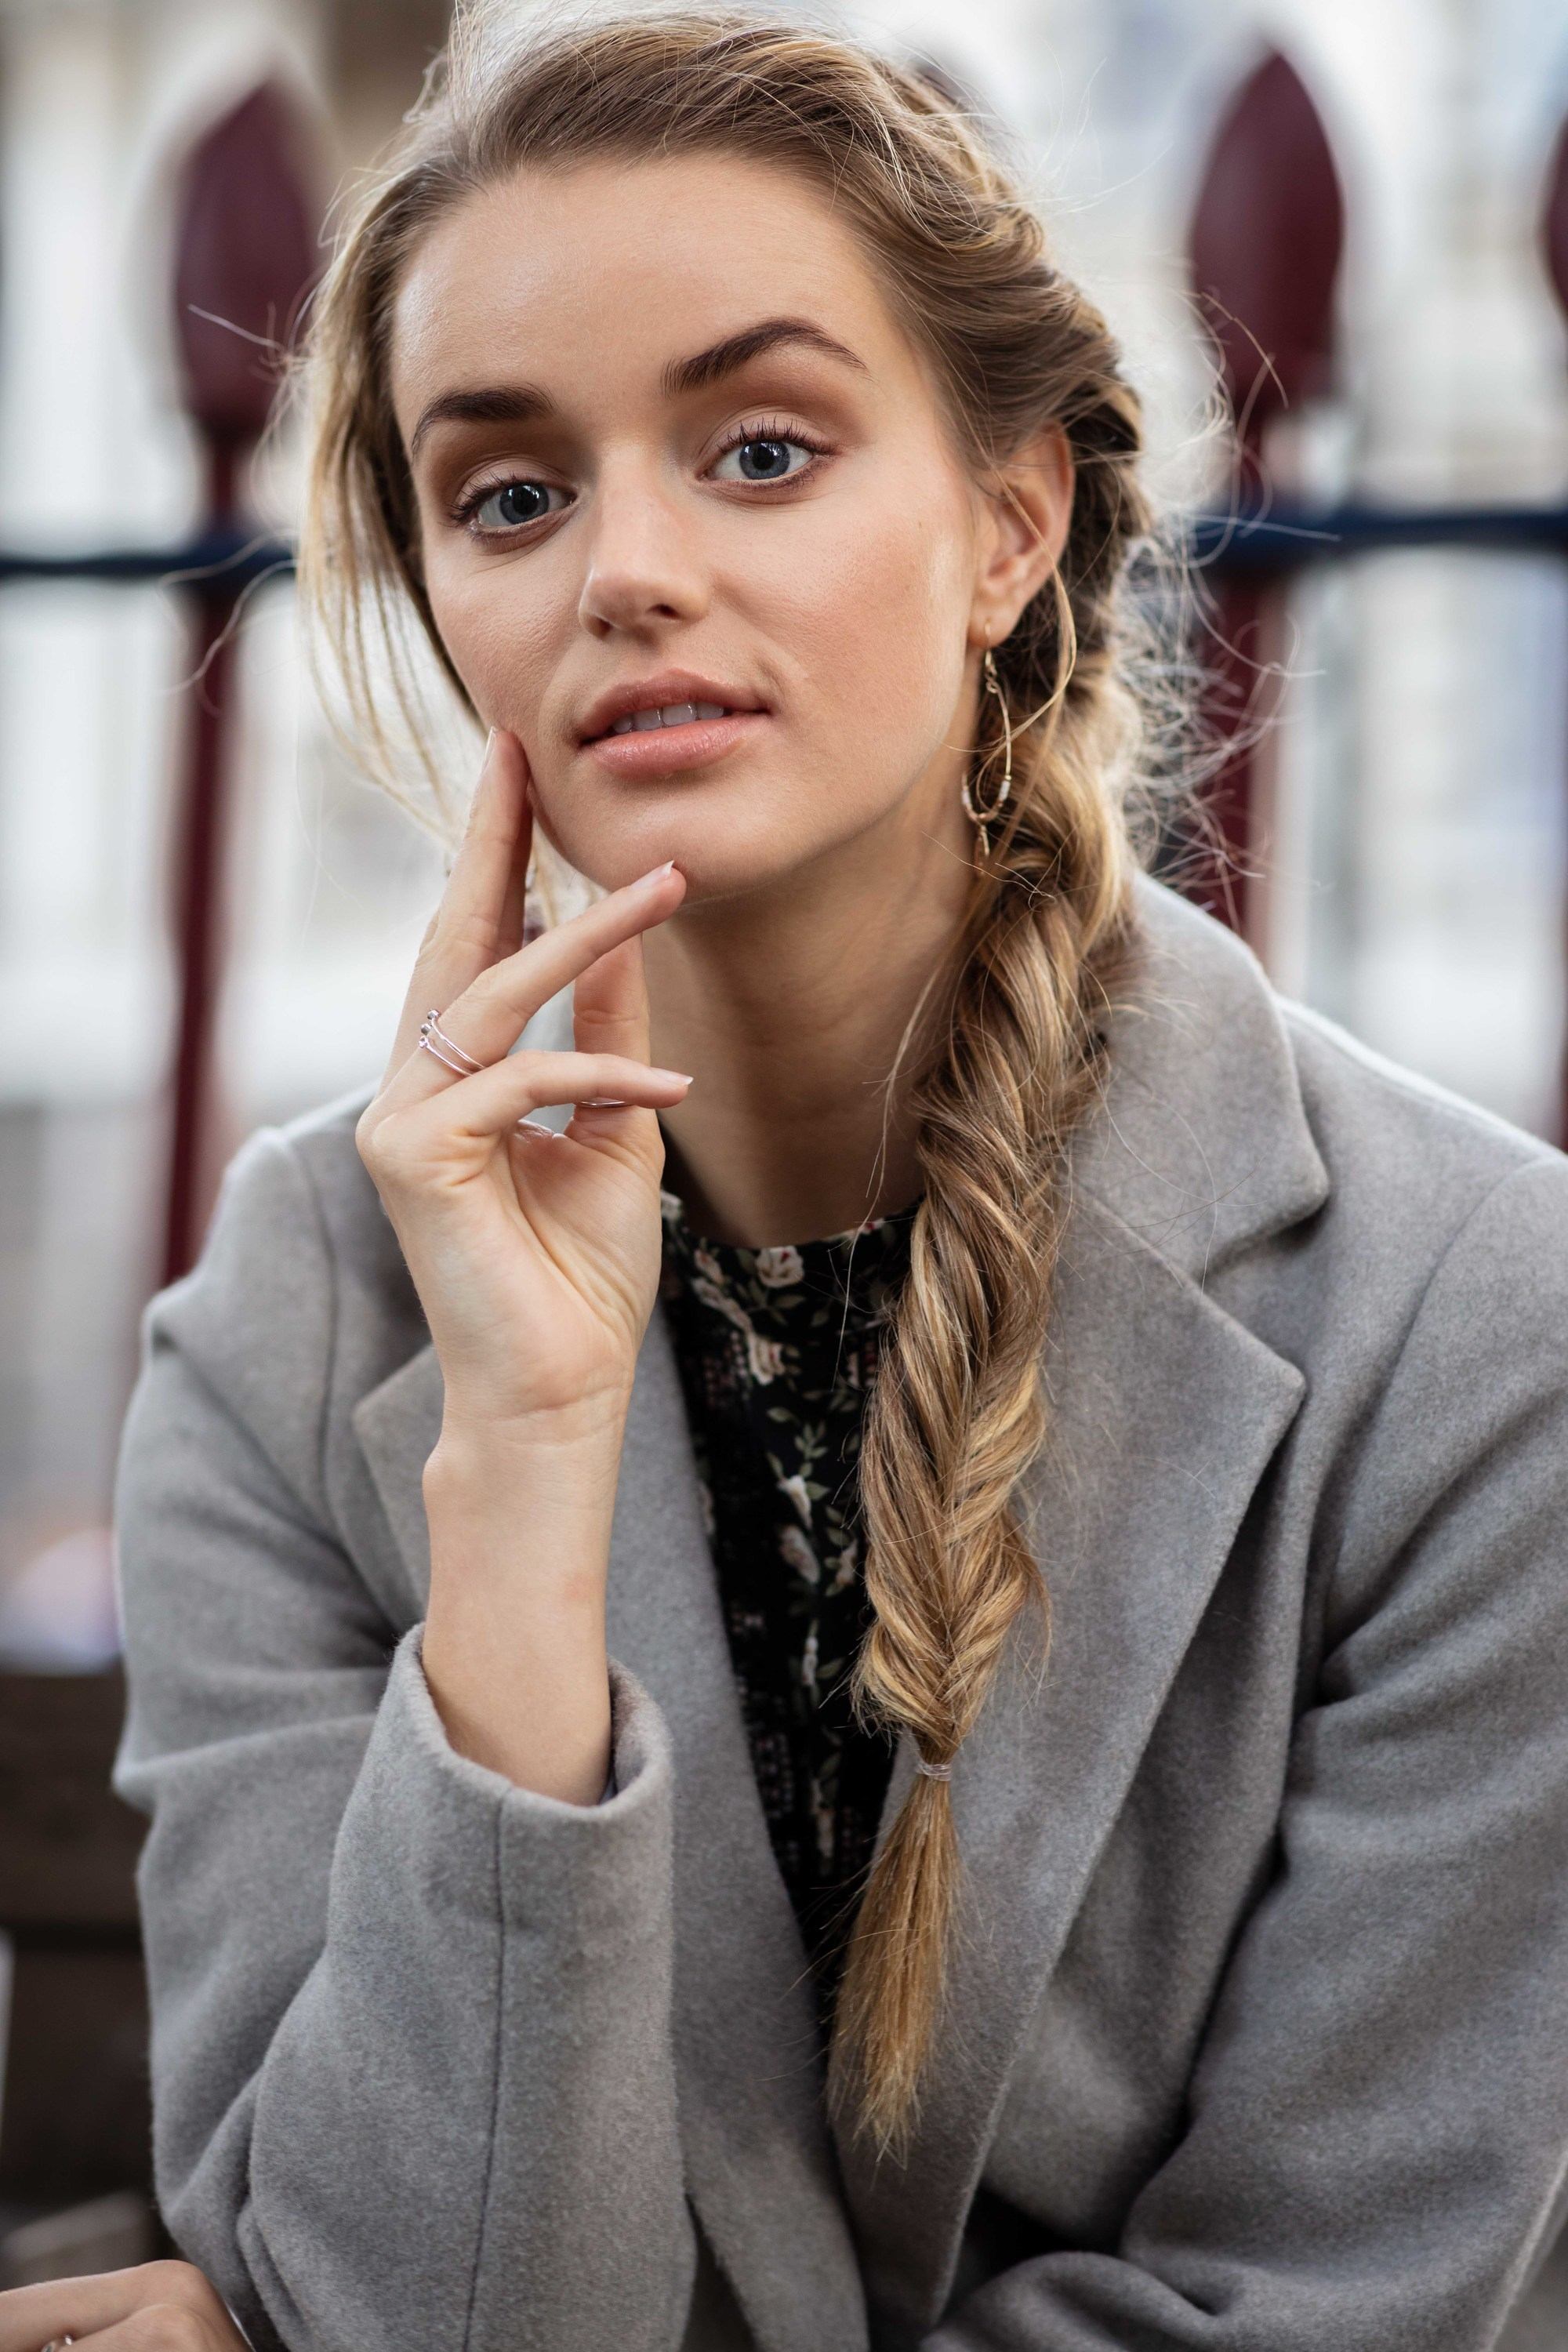 How to style long hair: Outdoor shot of a model with long blonde hair in a side fishtail braid, wearing a grey coat